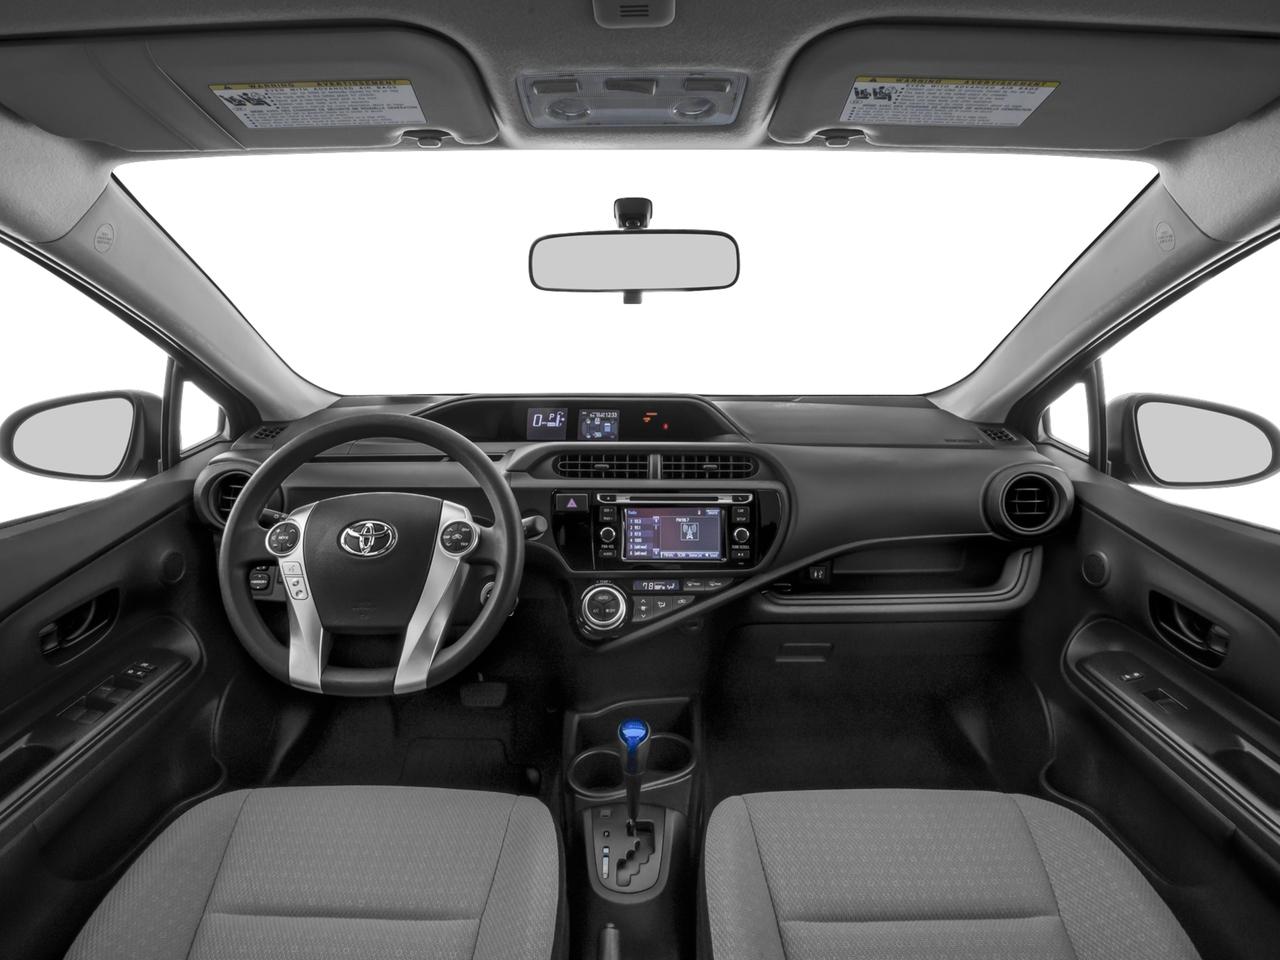 2016 Toyota Prius c Vehicle Photo in Ft. Myers, FL 33907